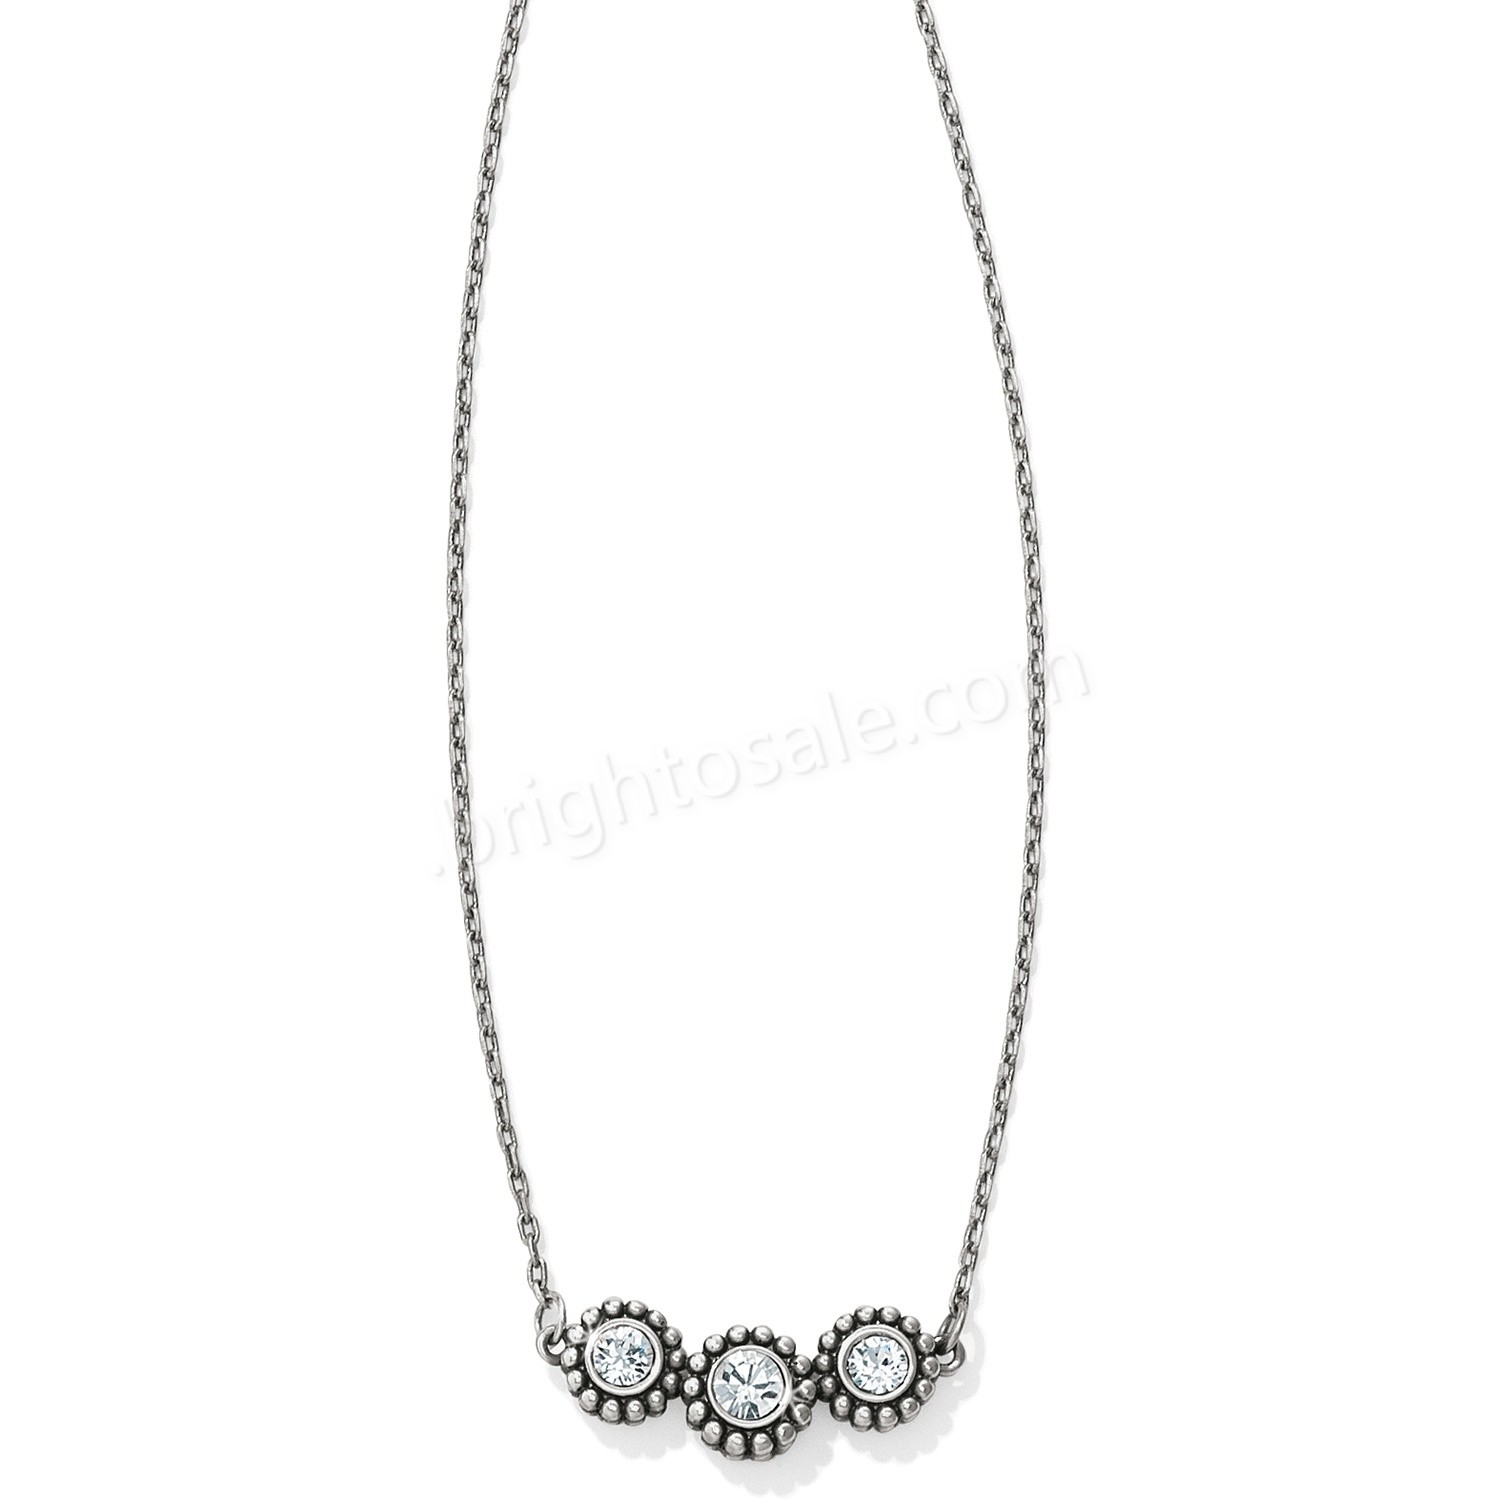 Brighton Collectibles & Online Discount Twinkle Triple Stone Necklace - Brighton Collectibles & Online Discount Twinkle Triple Stone Necklace